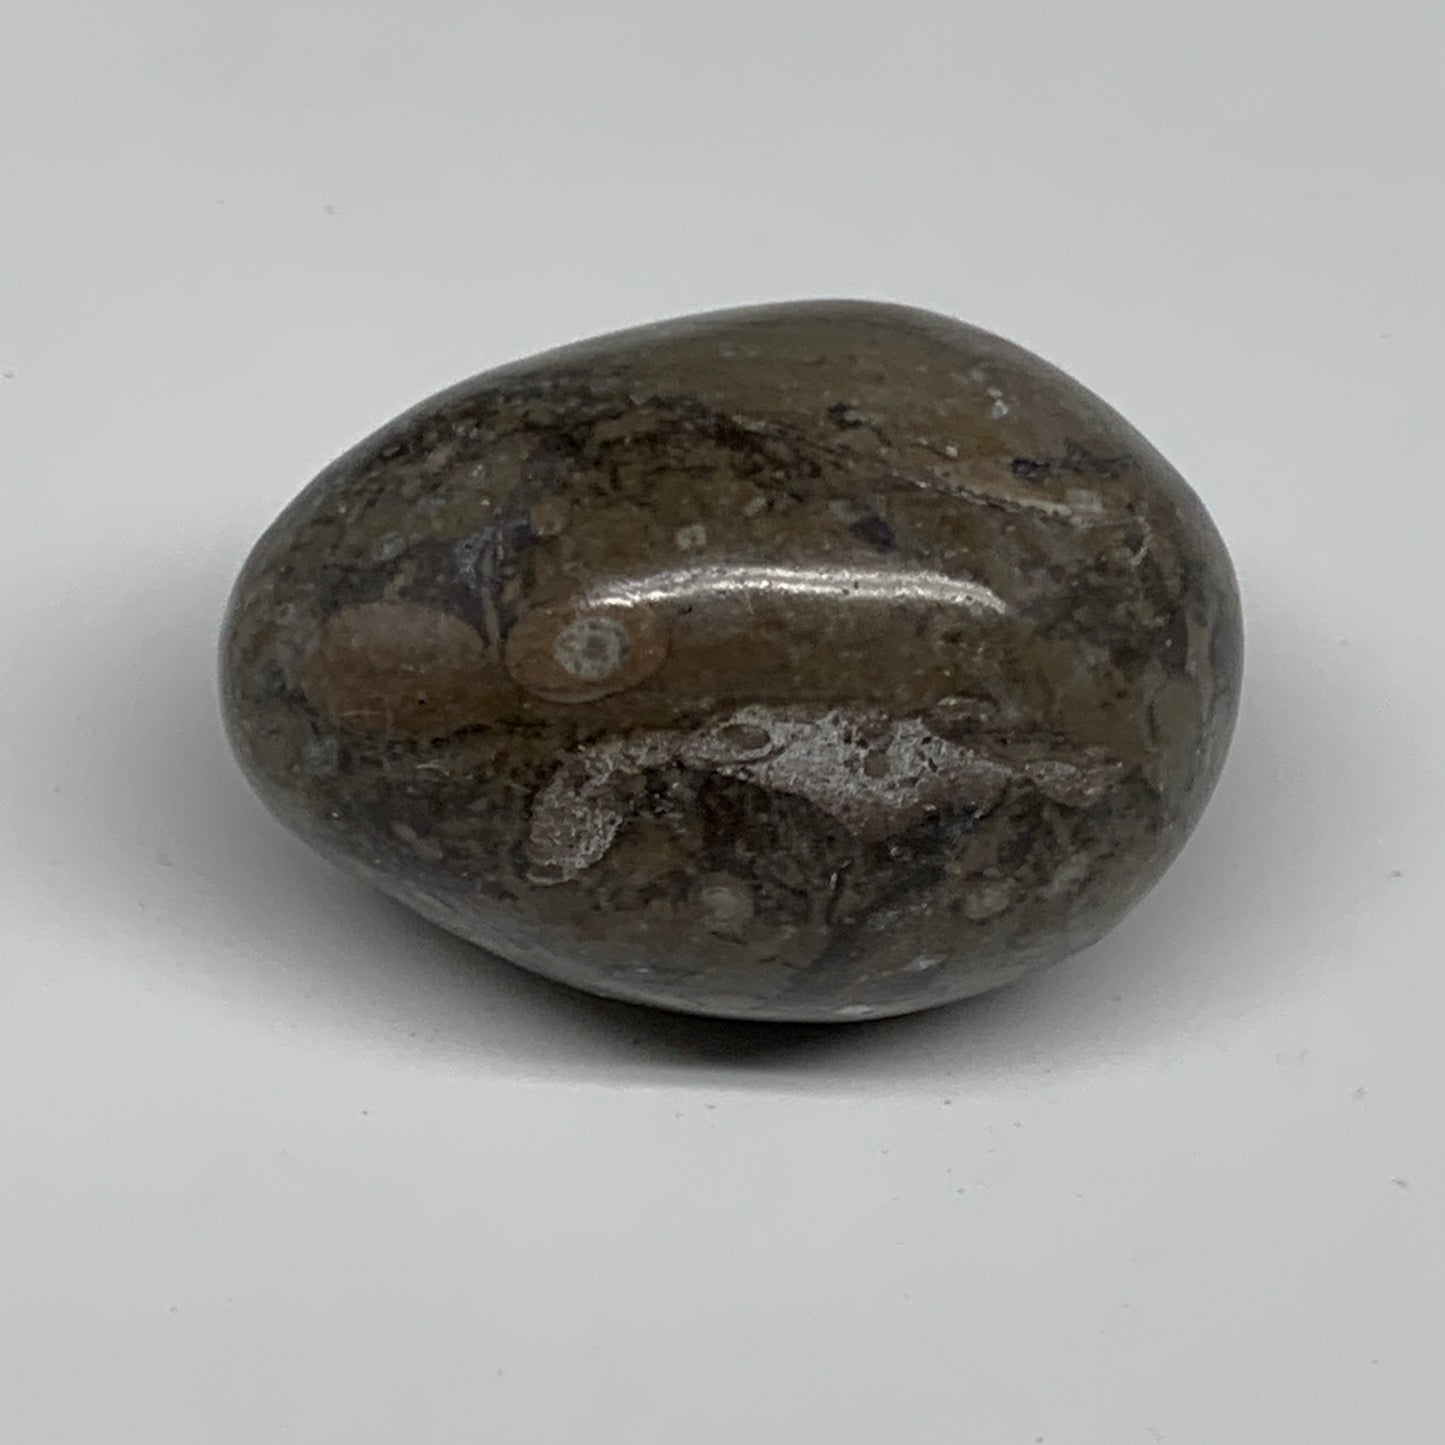 192.5g, 2.5"x1.8", Natural Fossil Orthoceras Stone Egg from Morocco, B31059